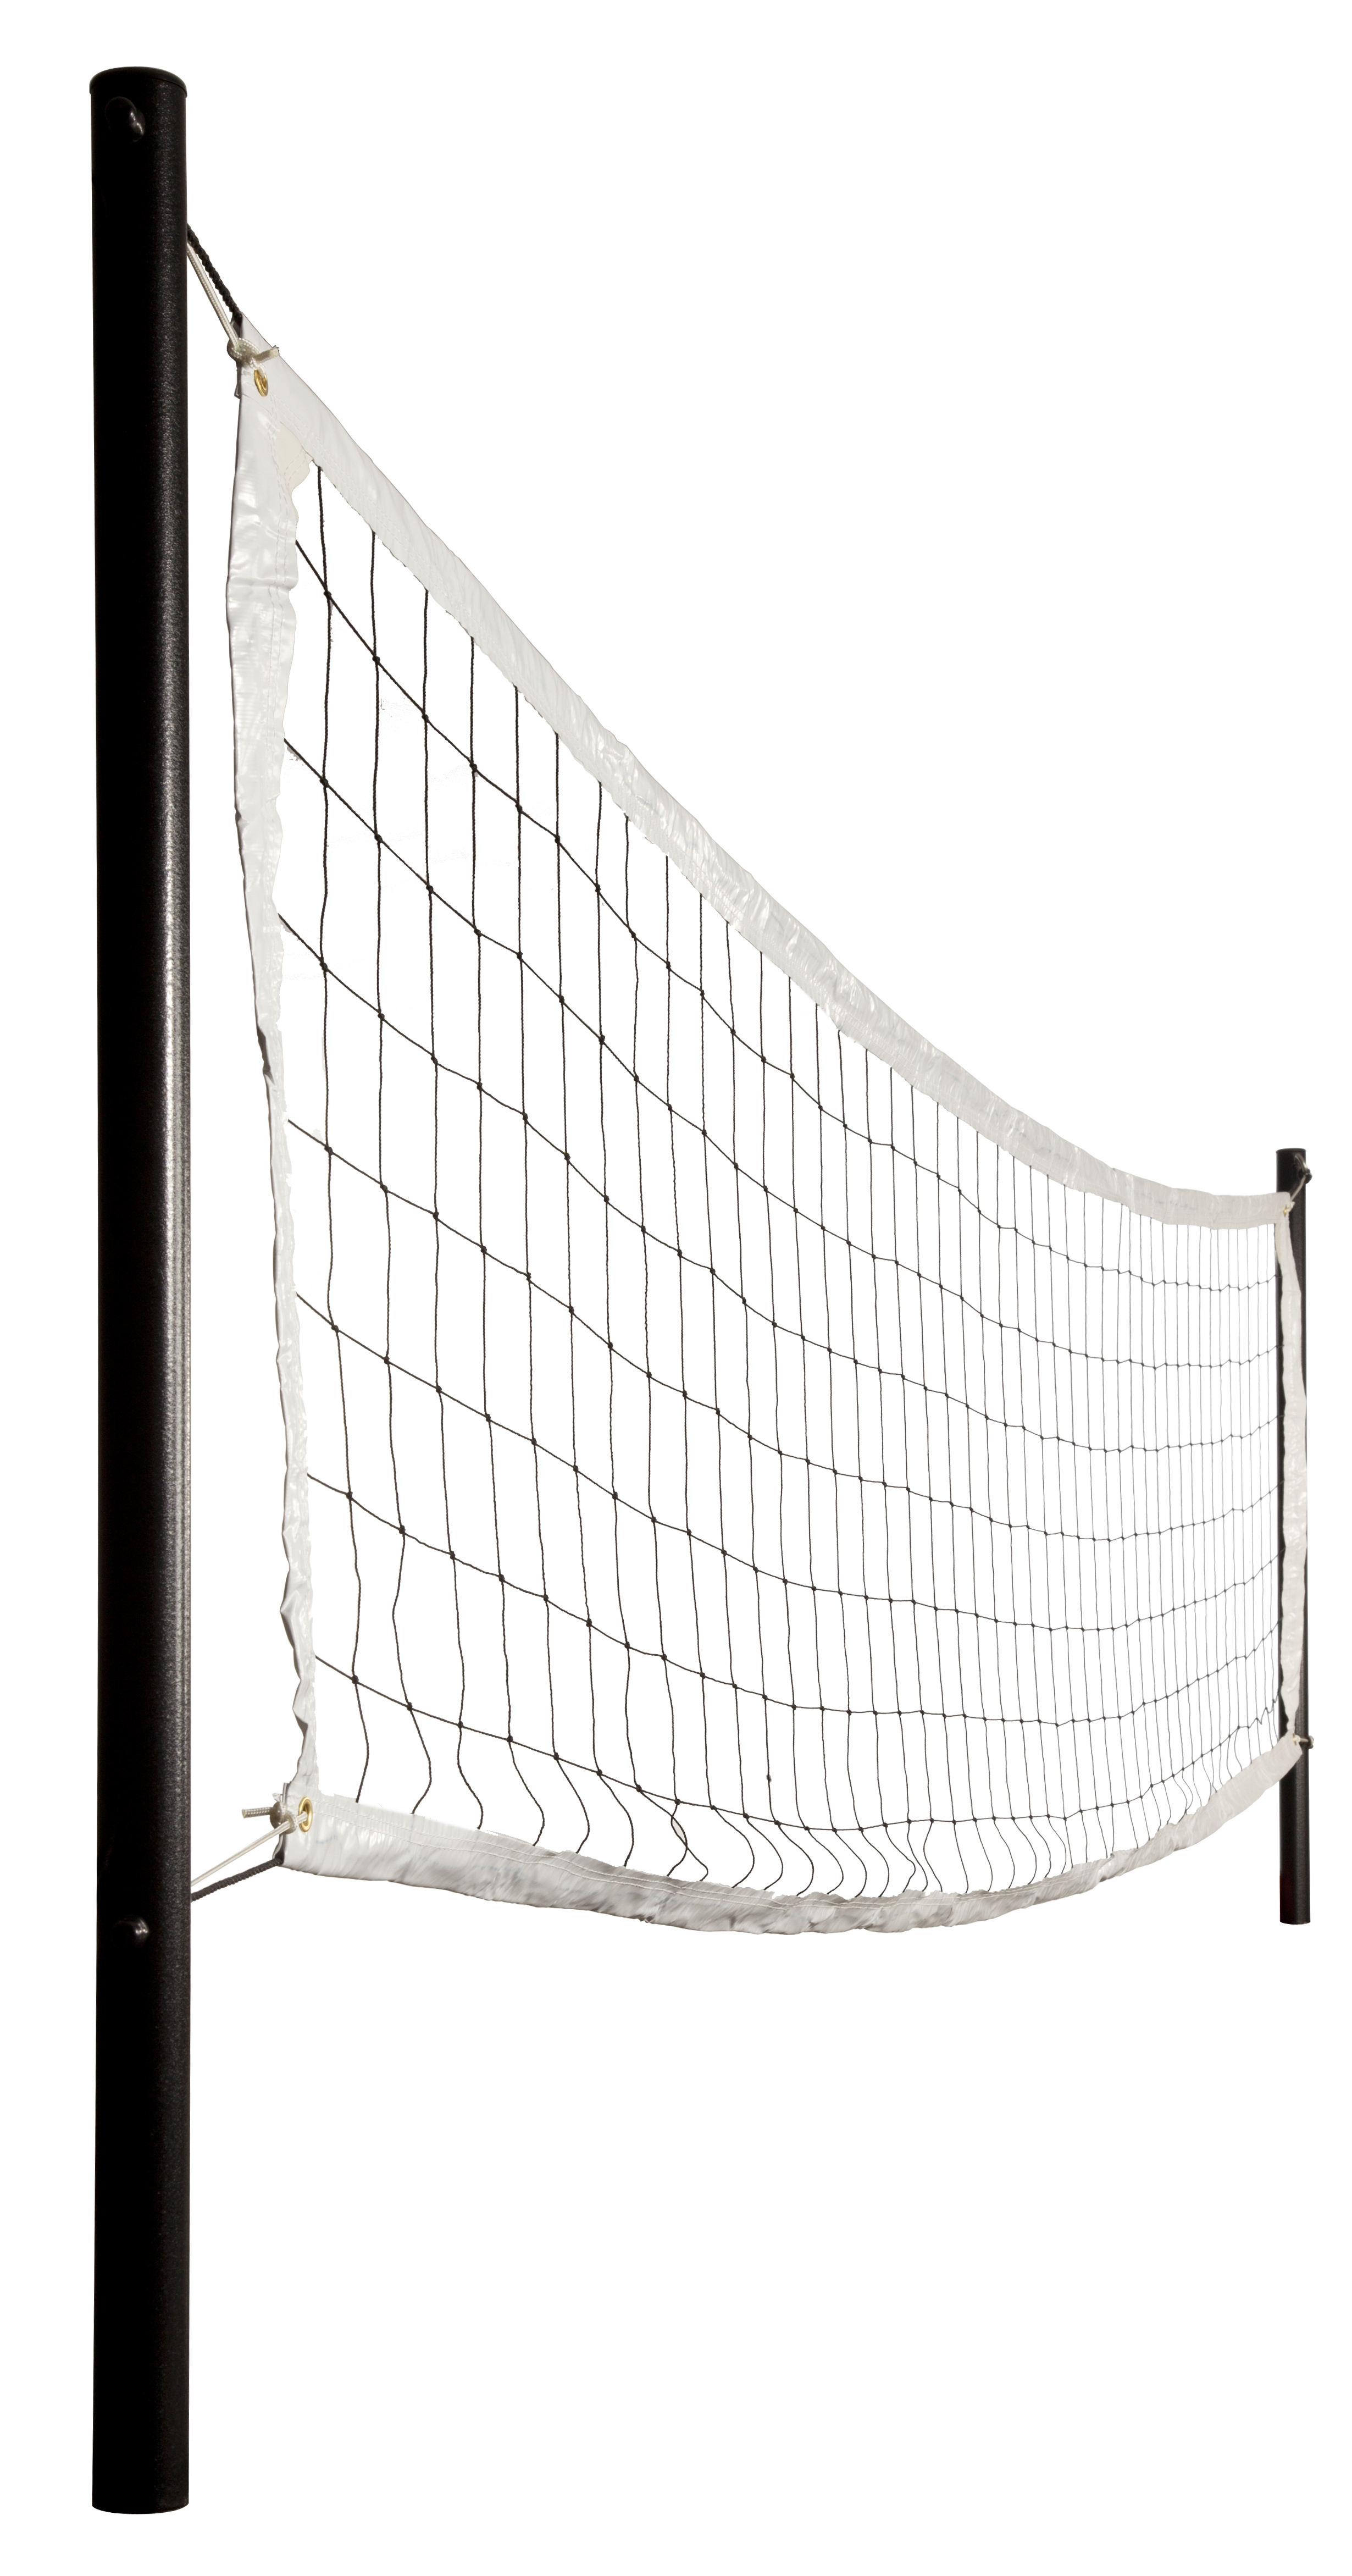 Volleyball Net Drawing With Label - 30 Volleyball Court Label ...